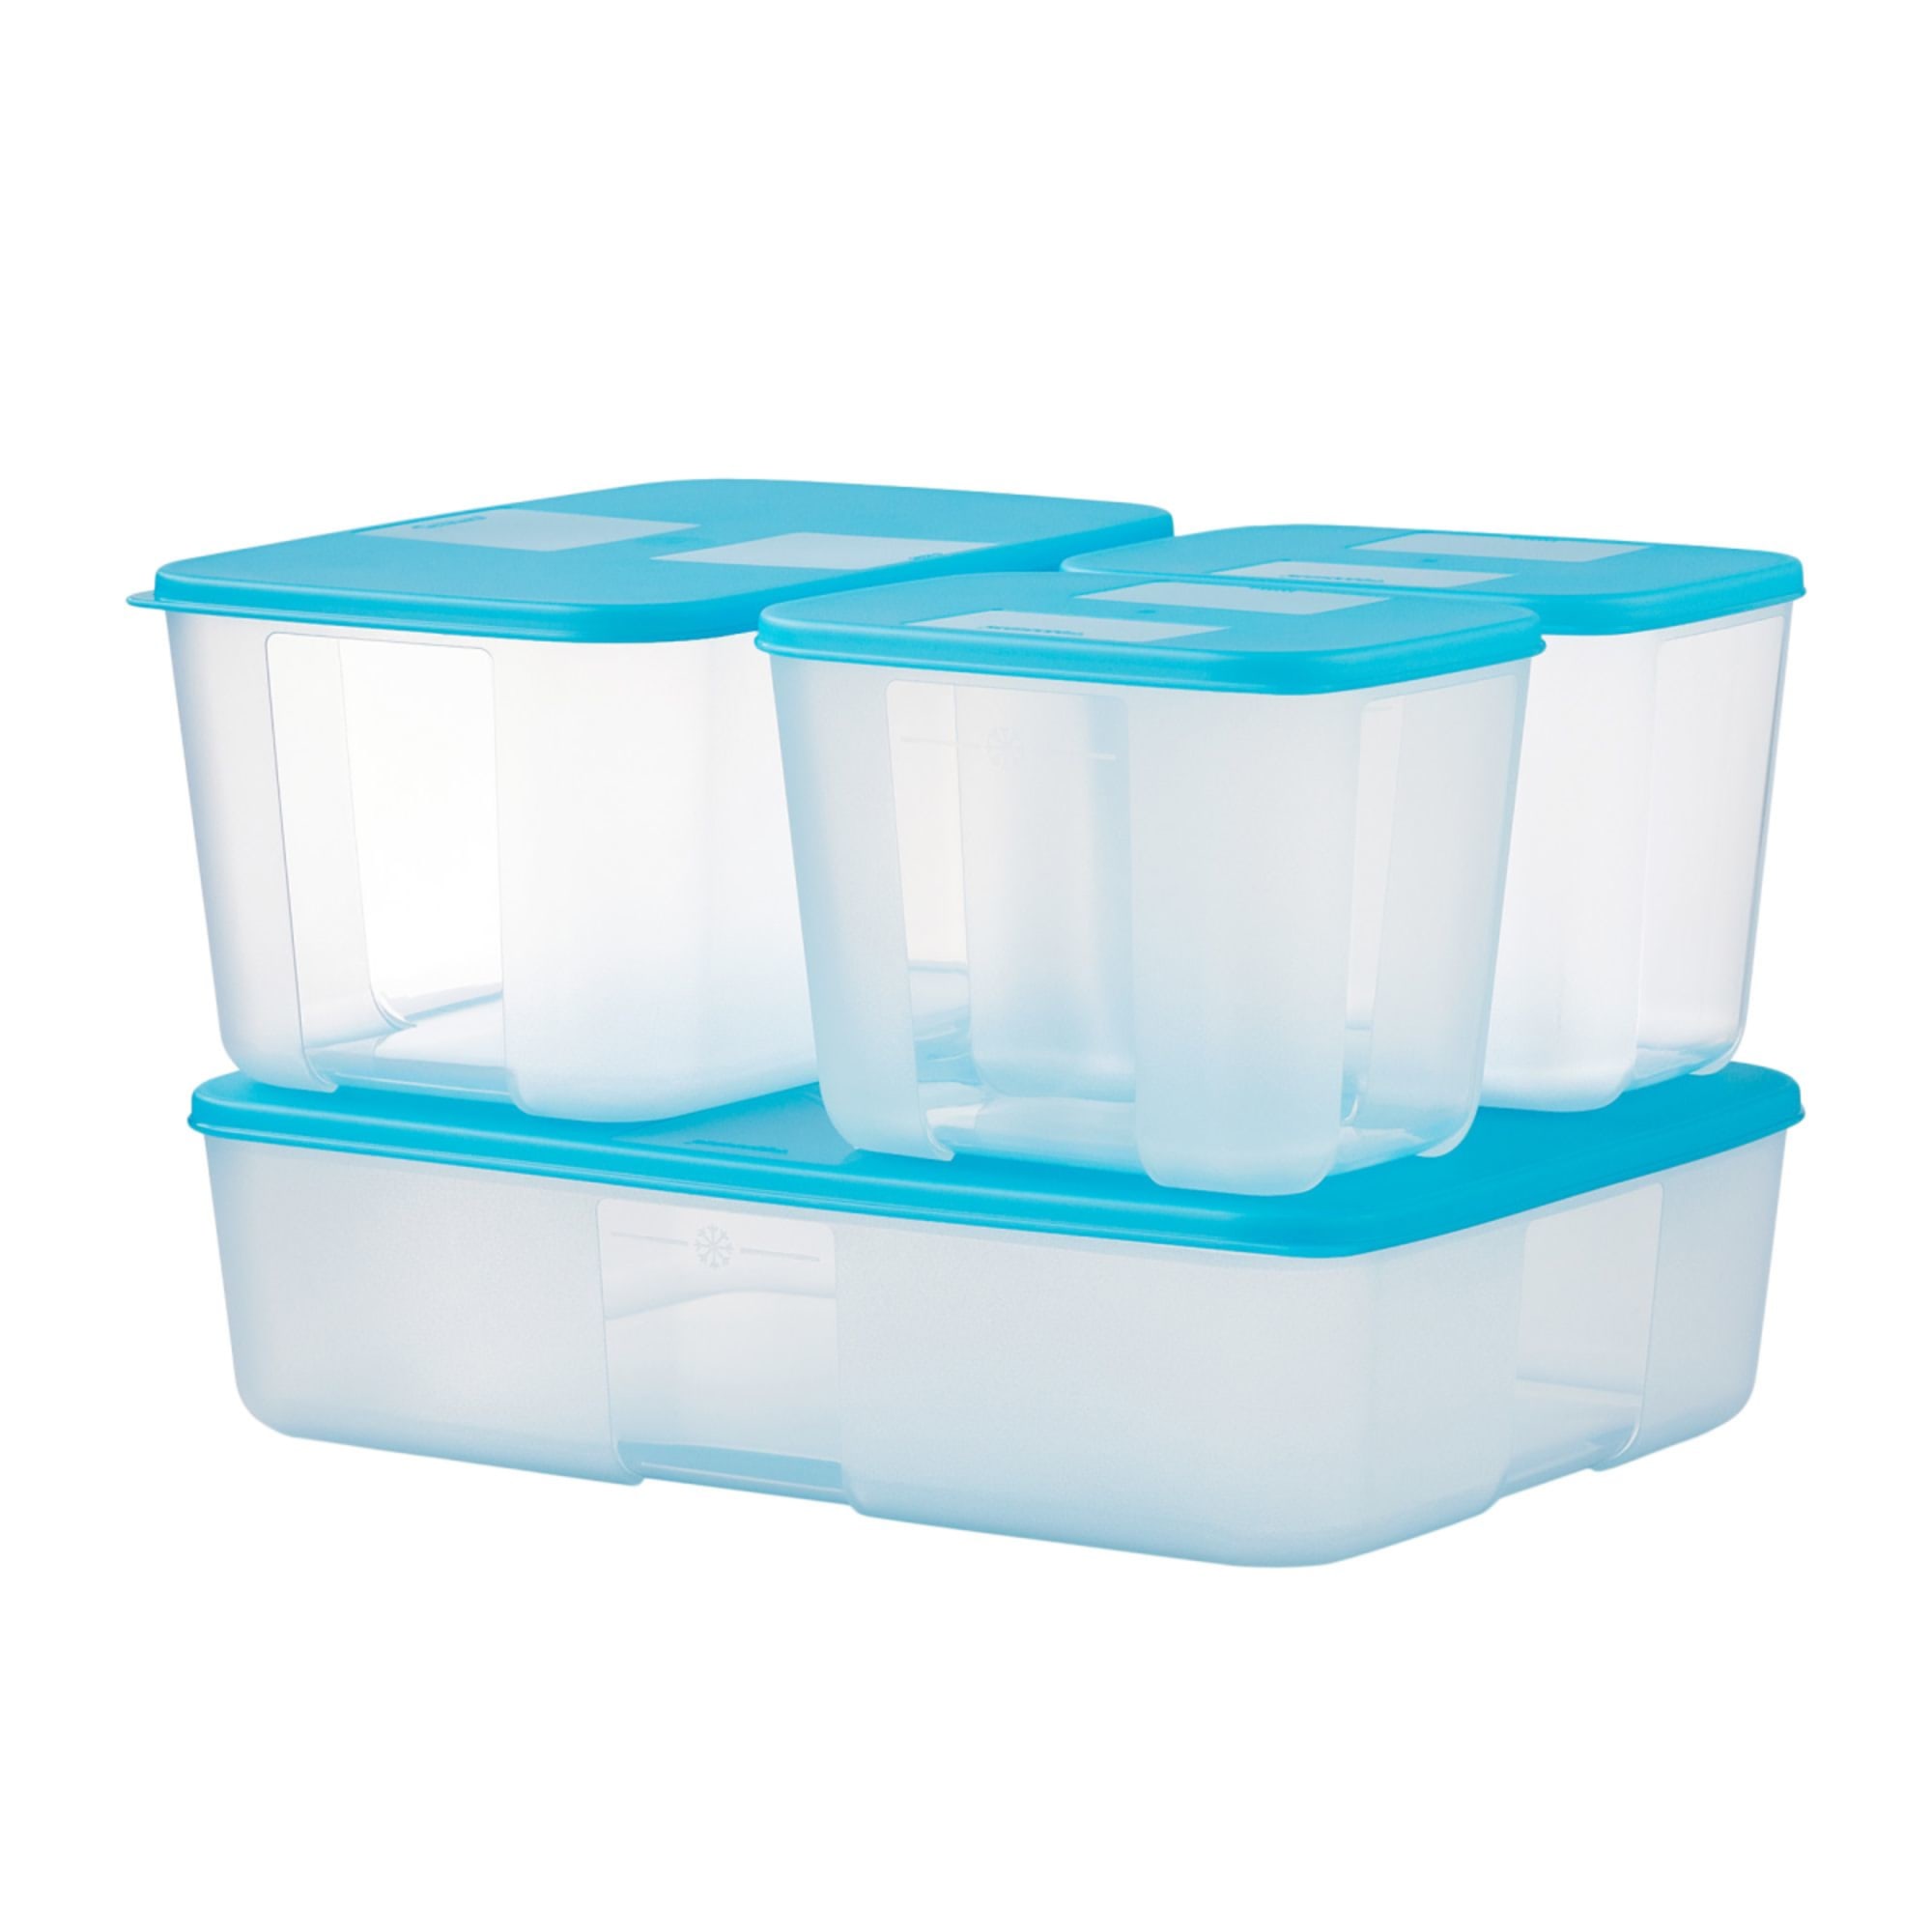 Tupperware Medium Store All Canister, 1.3 litres,1 Piece (Color